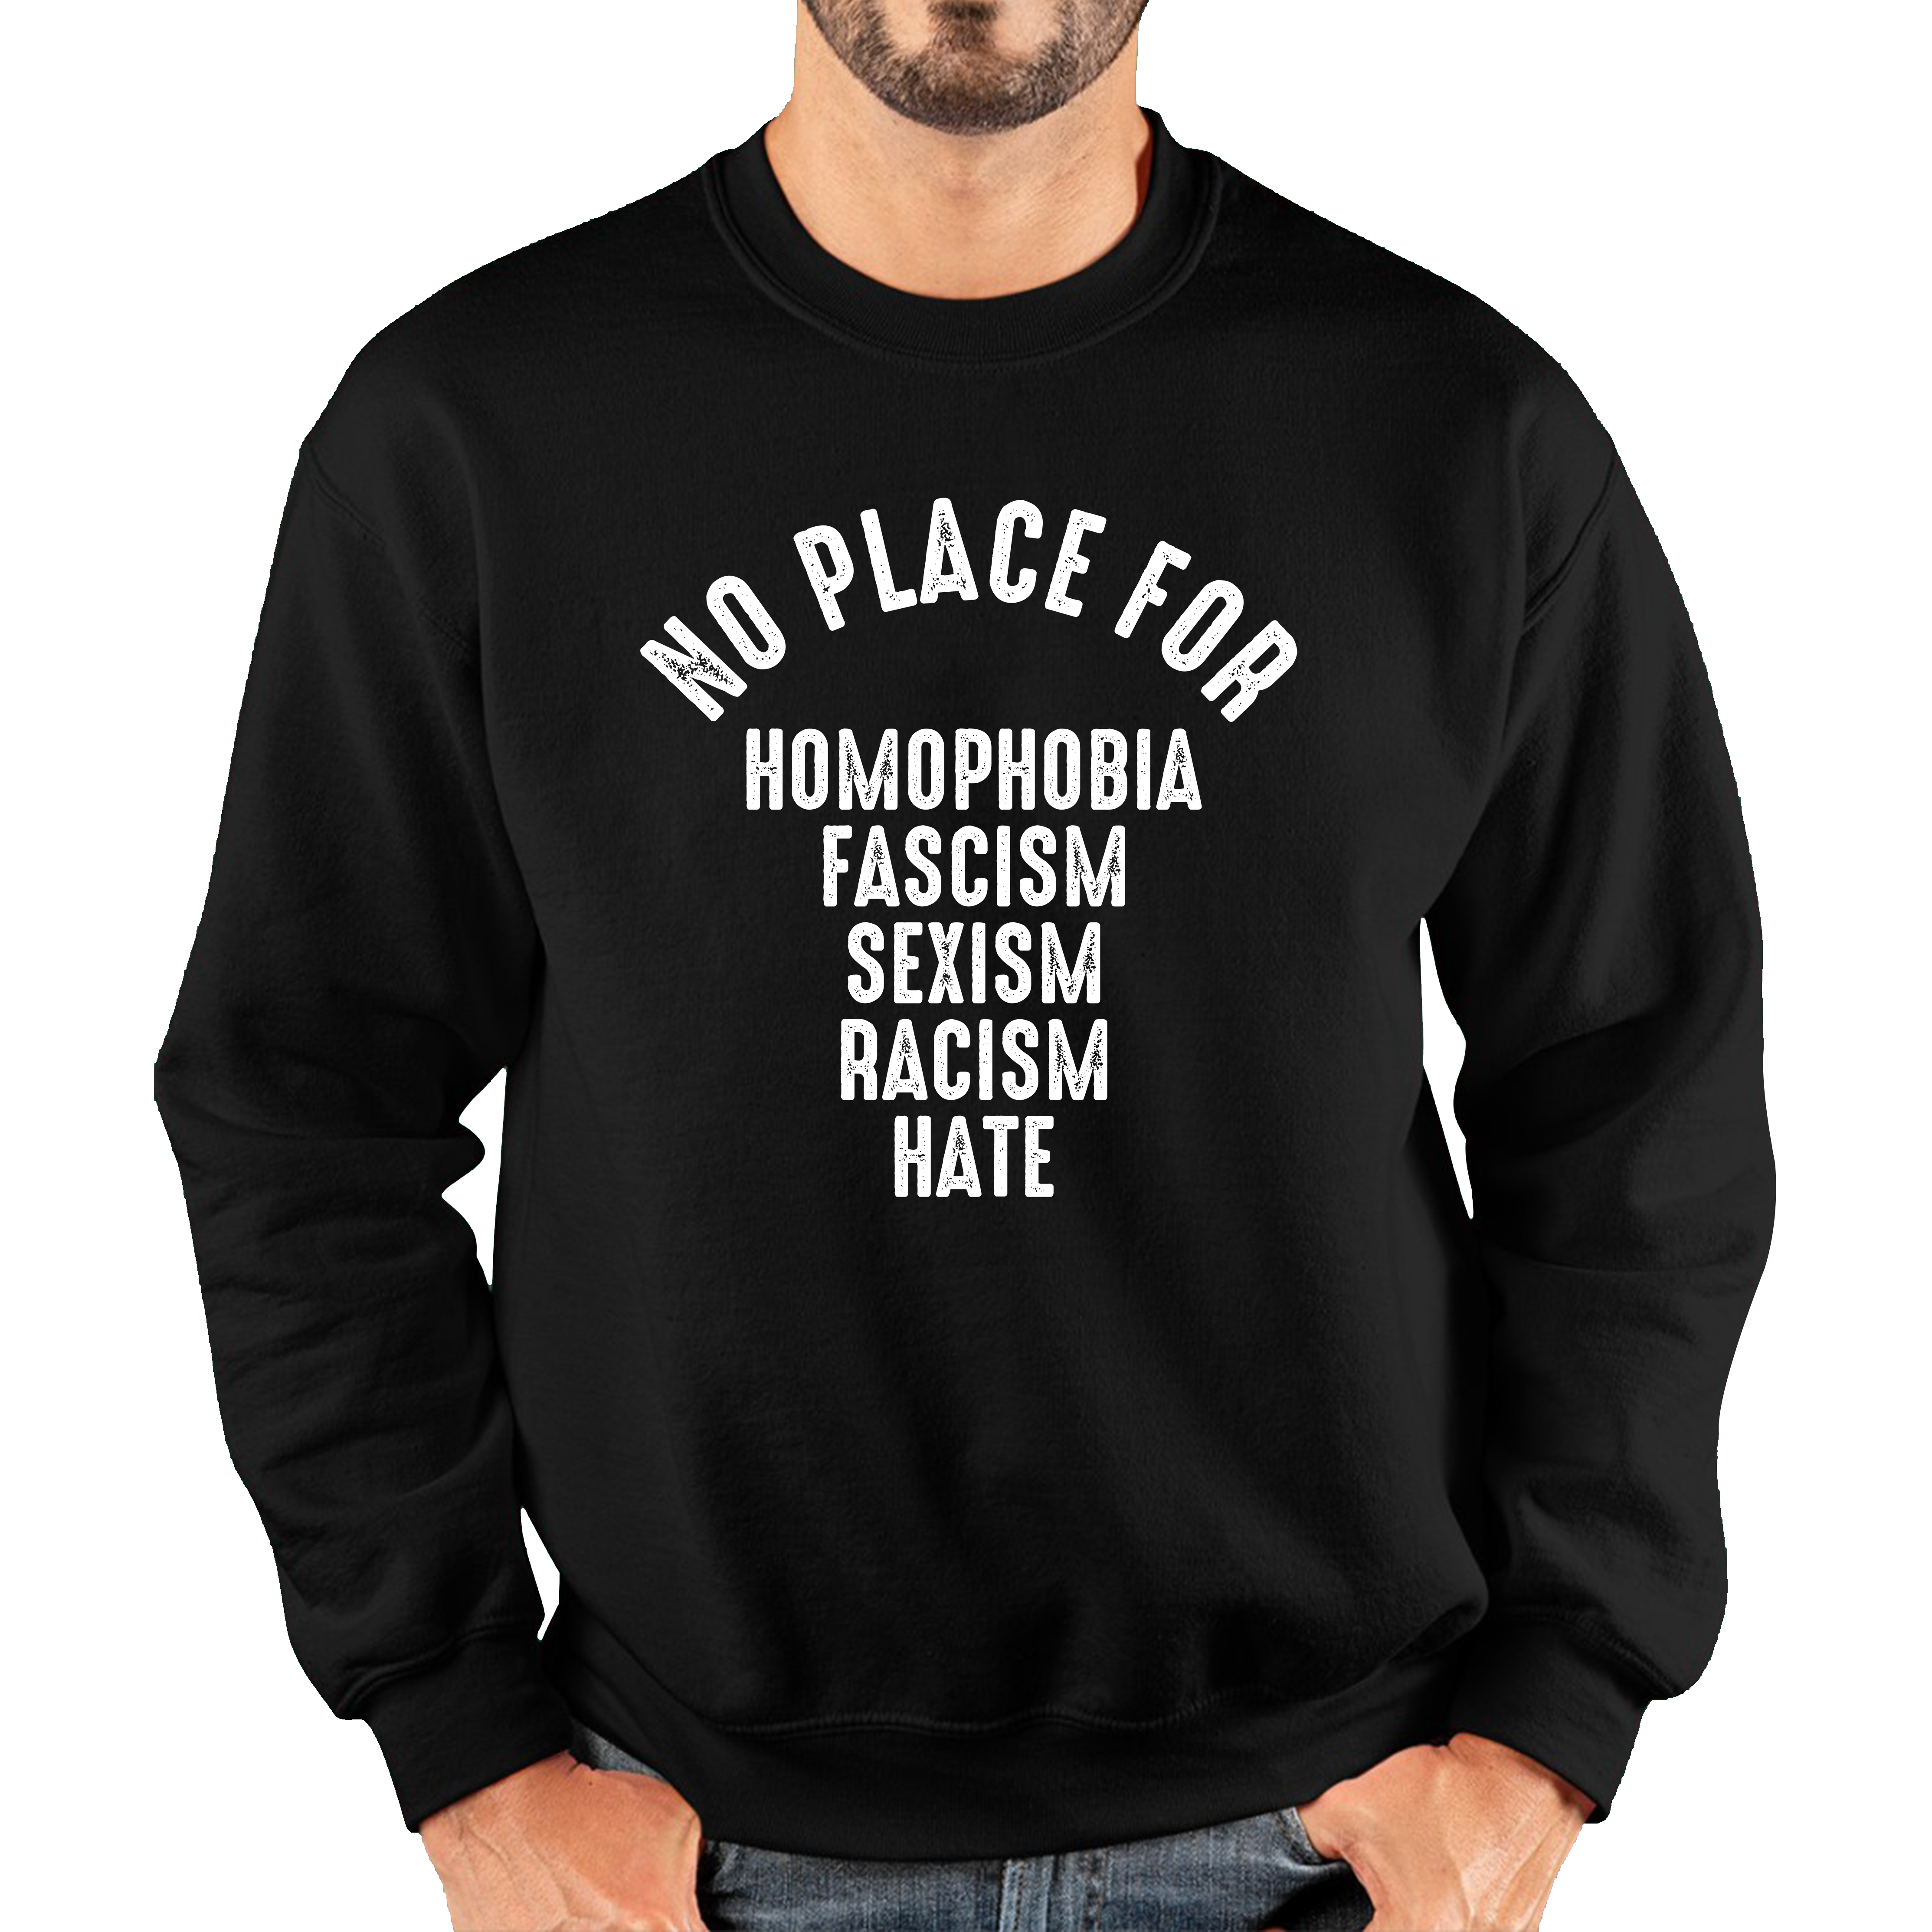 No Place For Homophobia Fascism Sexism Racism Hate Adult Sweatshirt